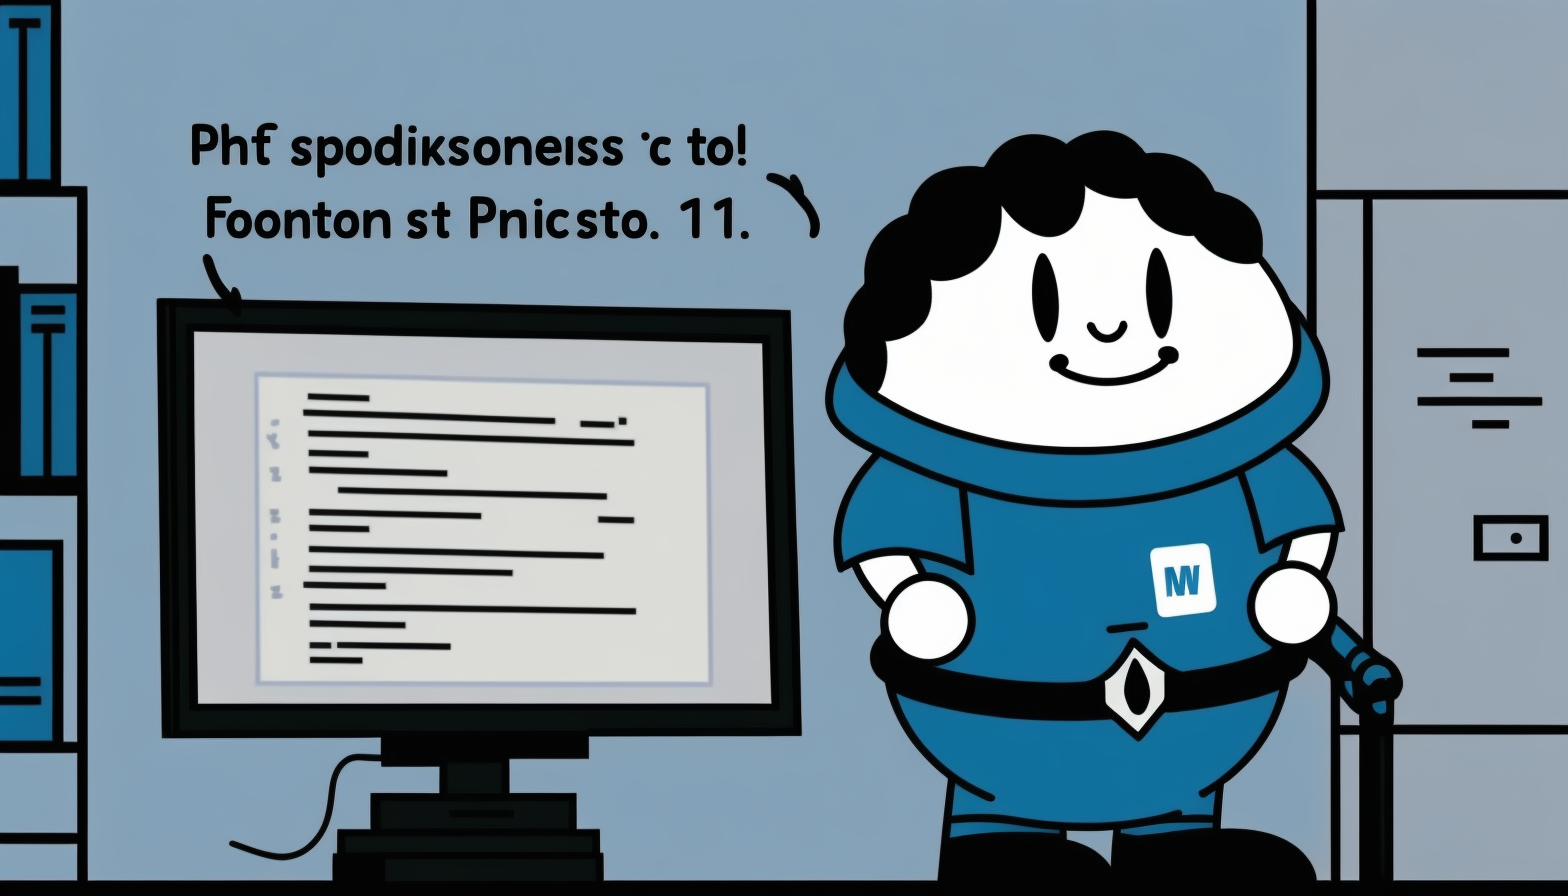 A cartoon character holding a script and standing in front of a computer with PowerShell prompt, indicating ease in PowerShell scripting for beginners